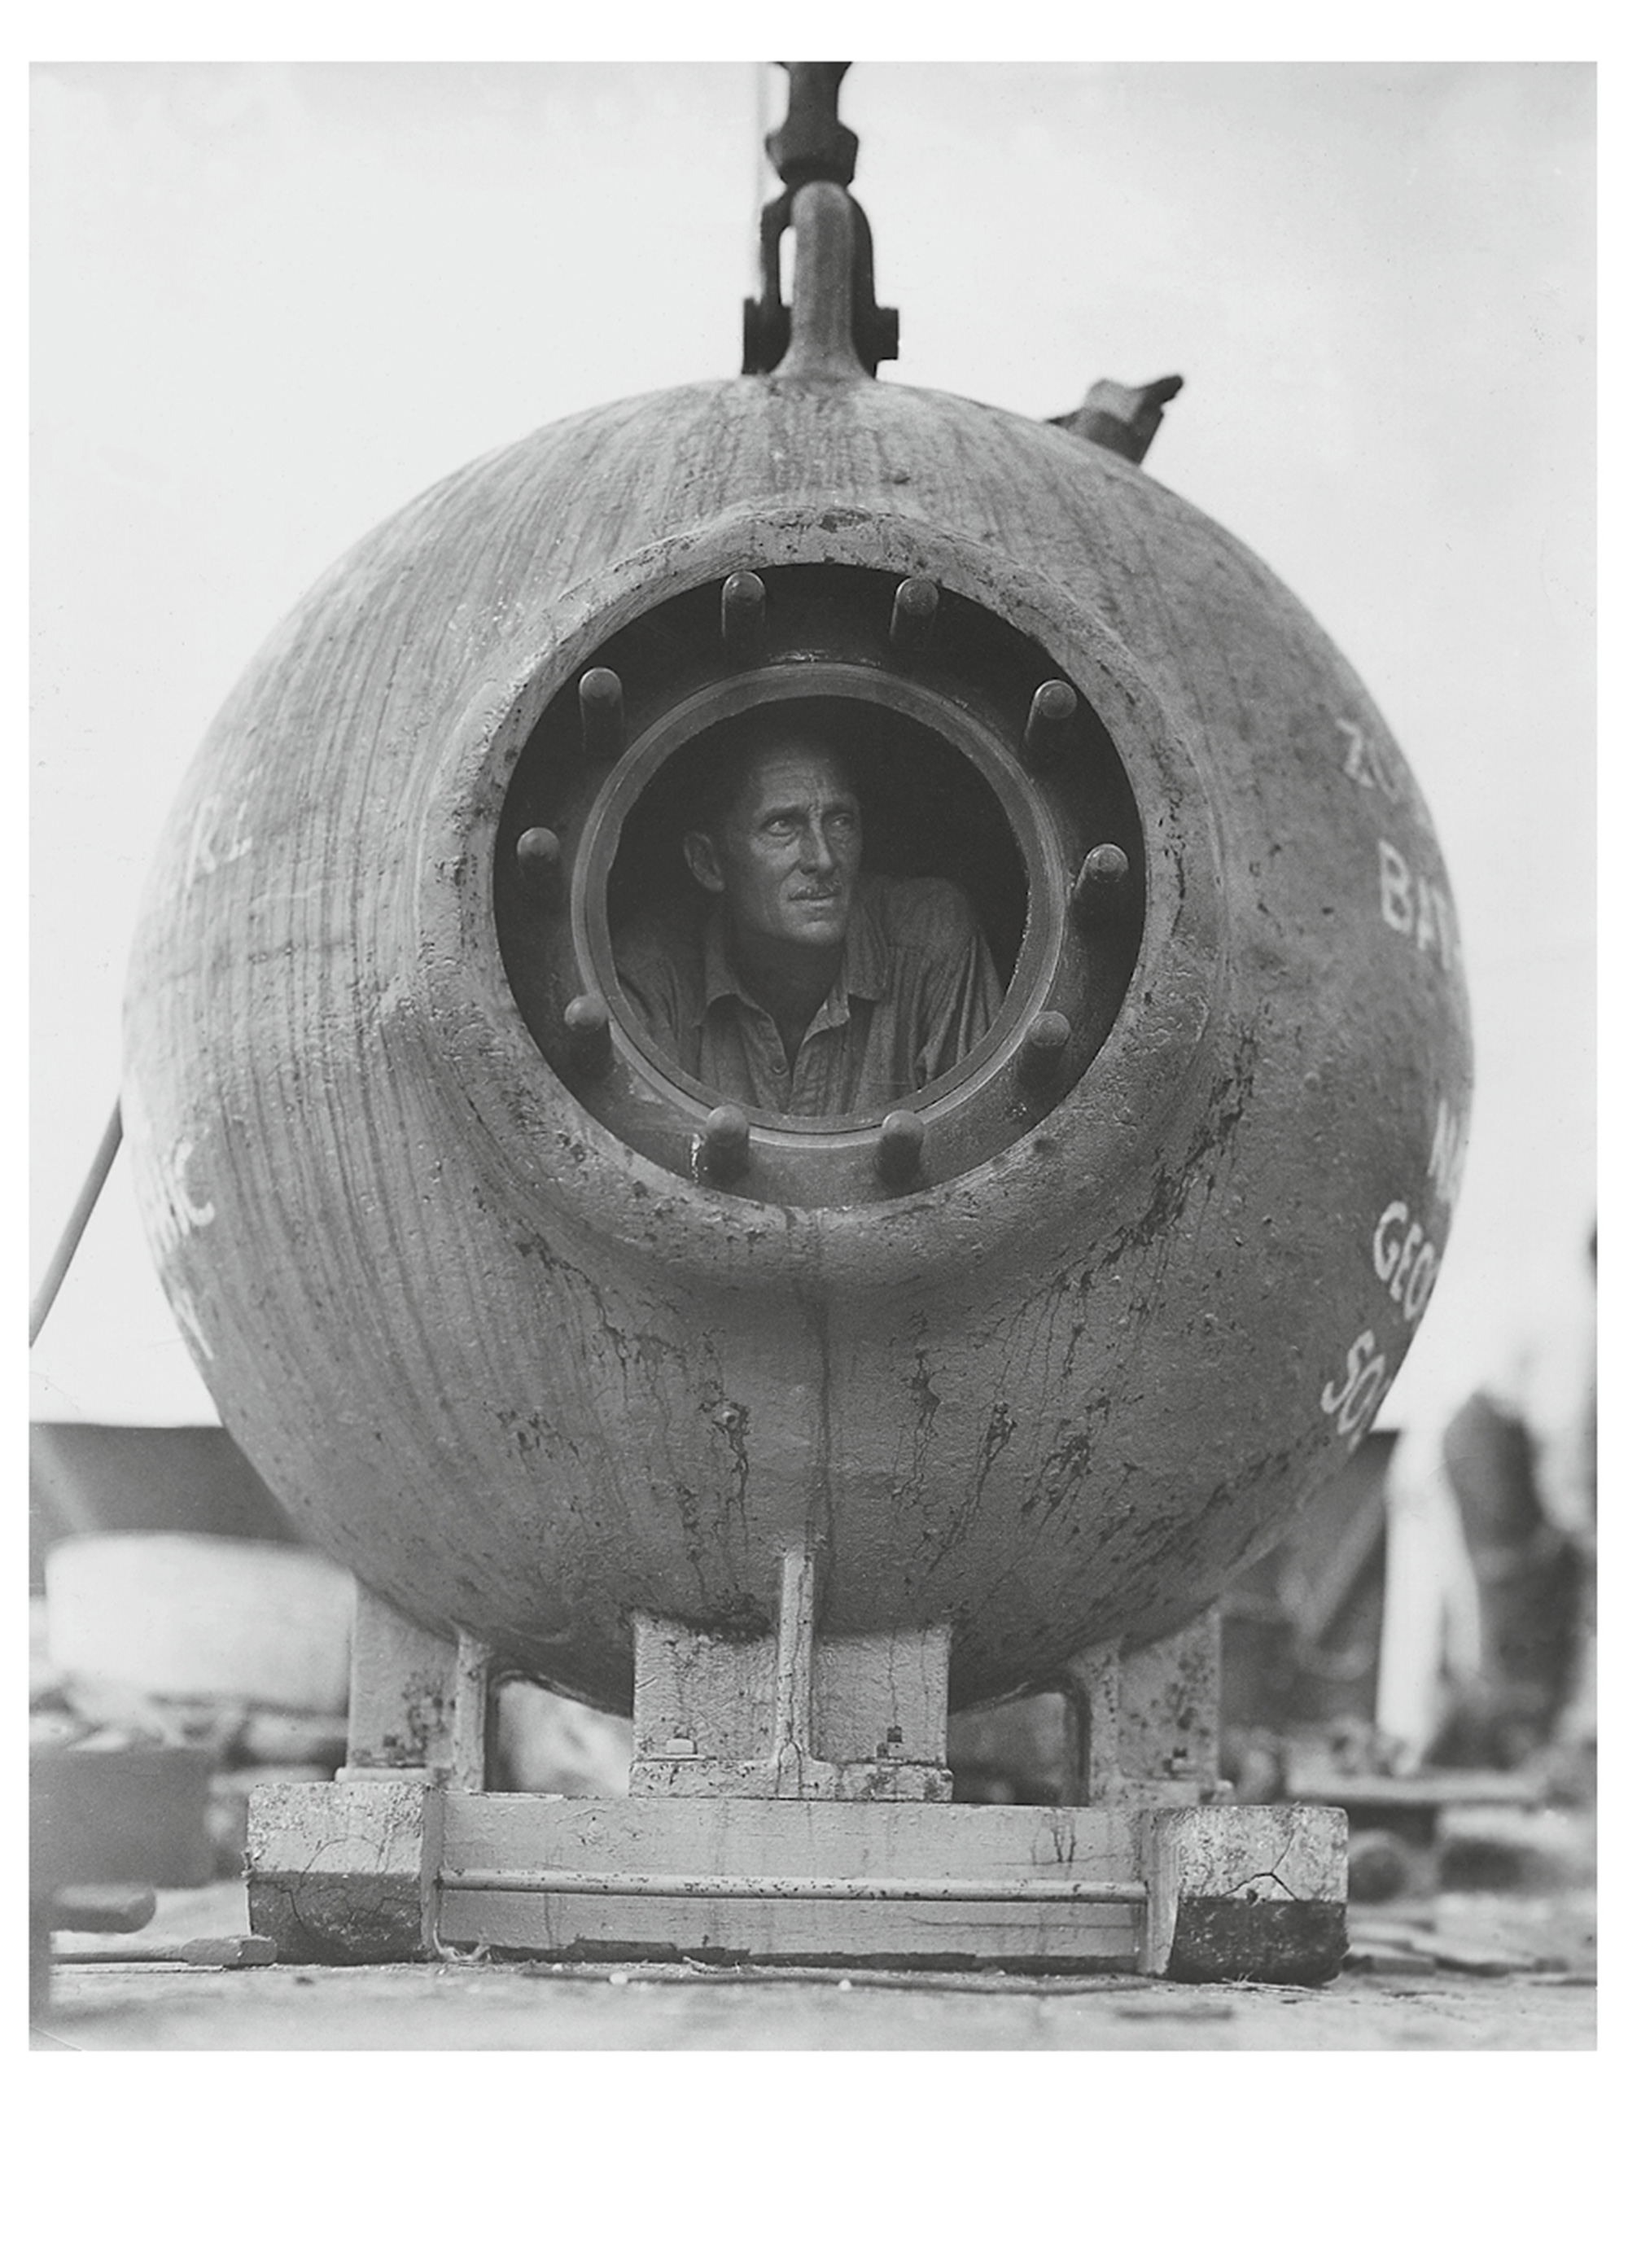 William Beebe in the Bathysphere, early 1930s. Courtesy the Wildlife Conservation Society.